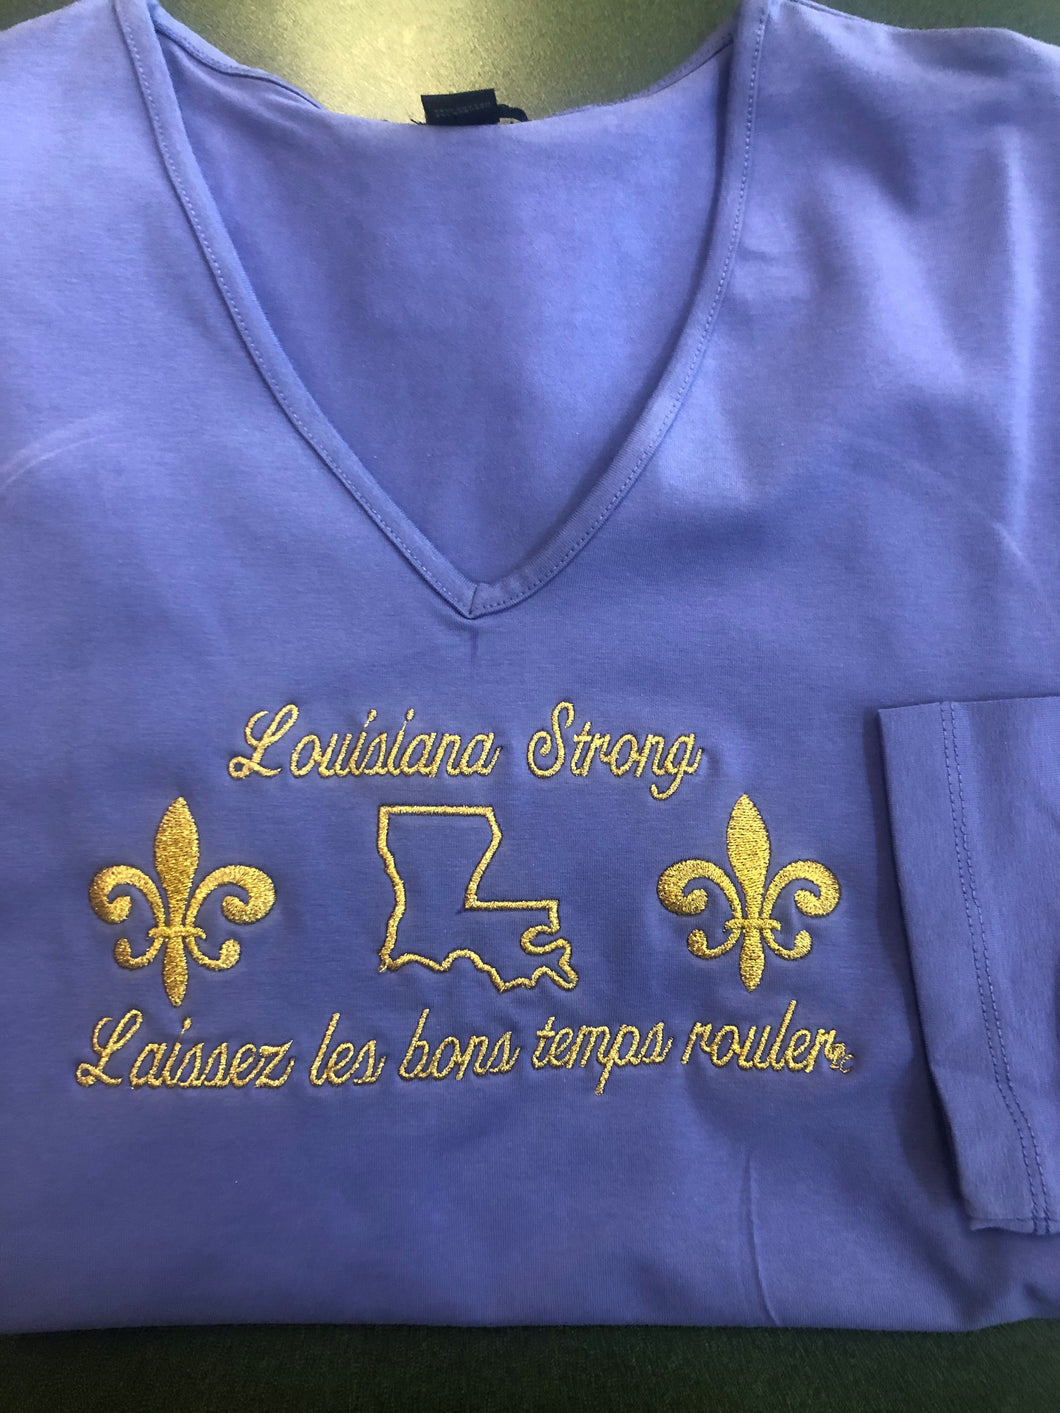 LOUISIANA STRONG FITTED TEE SHIRT